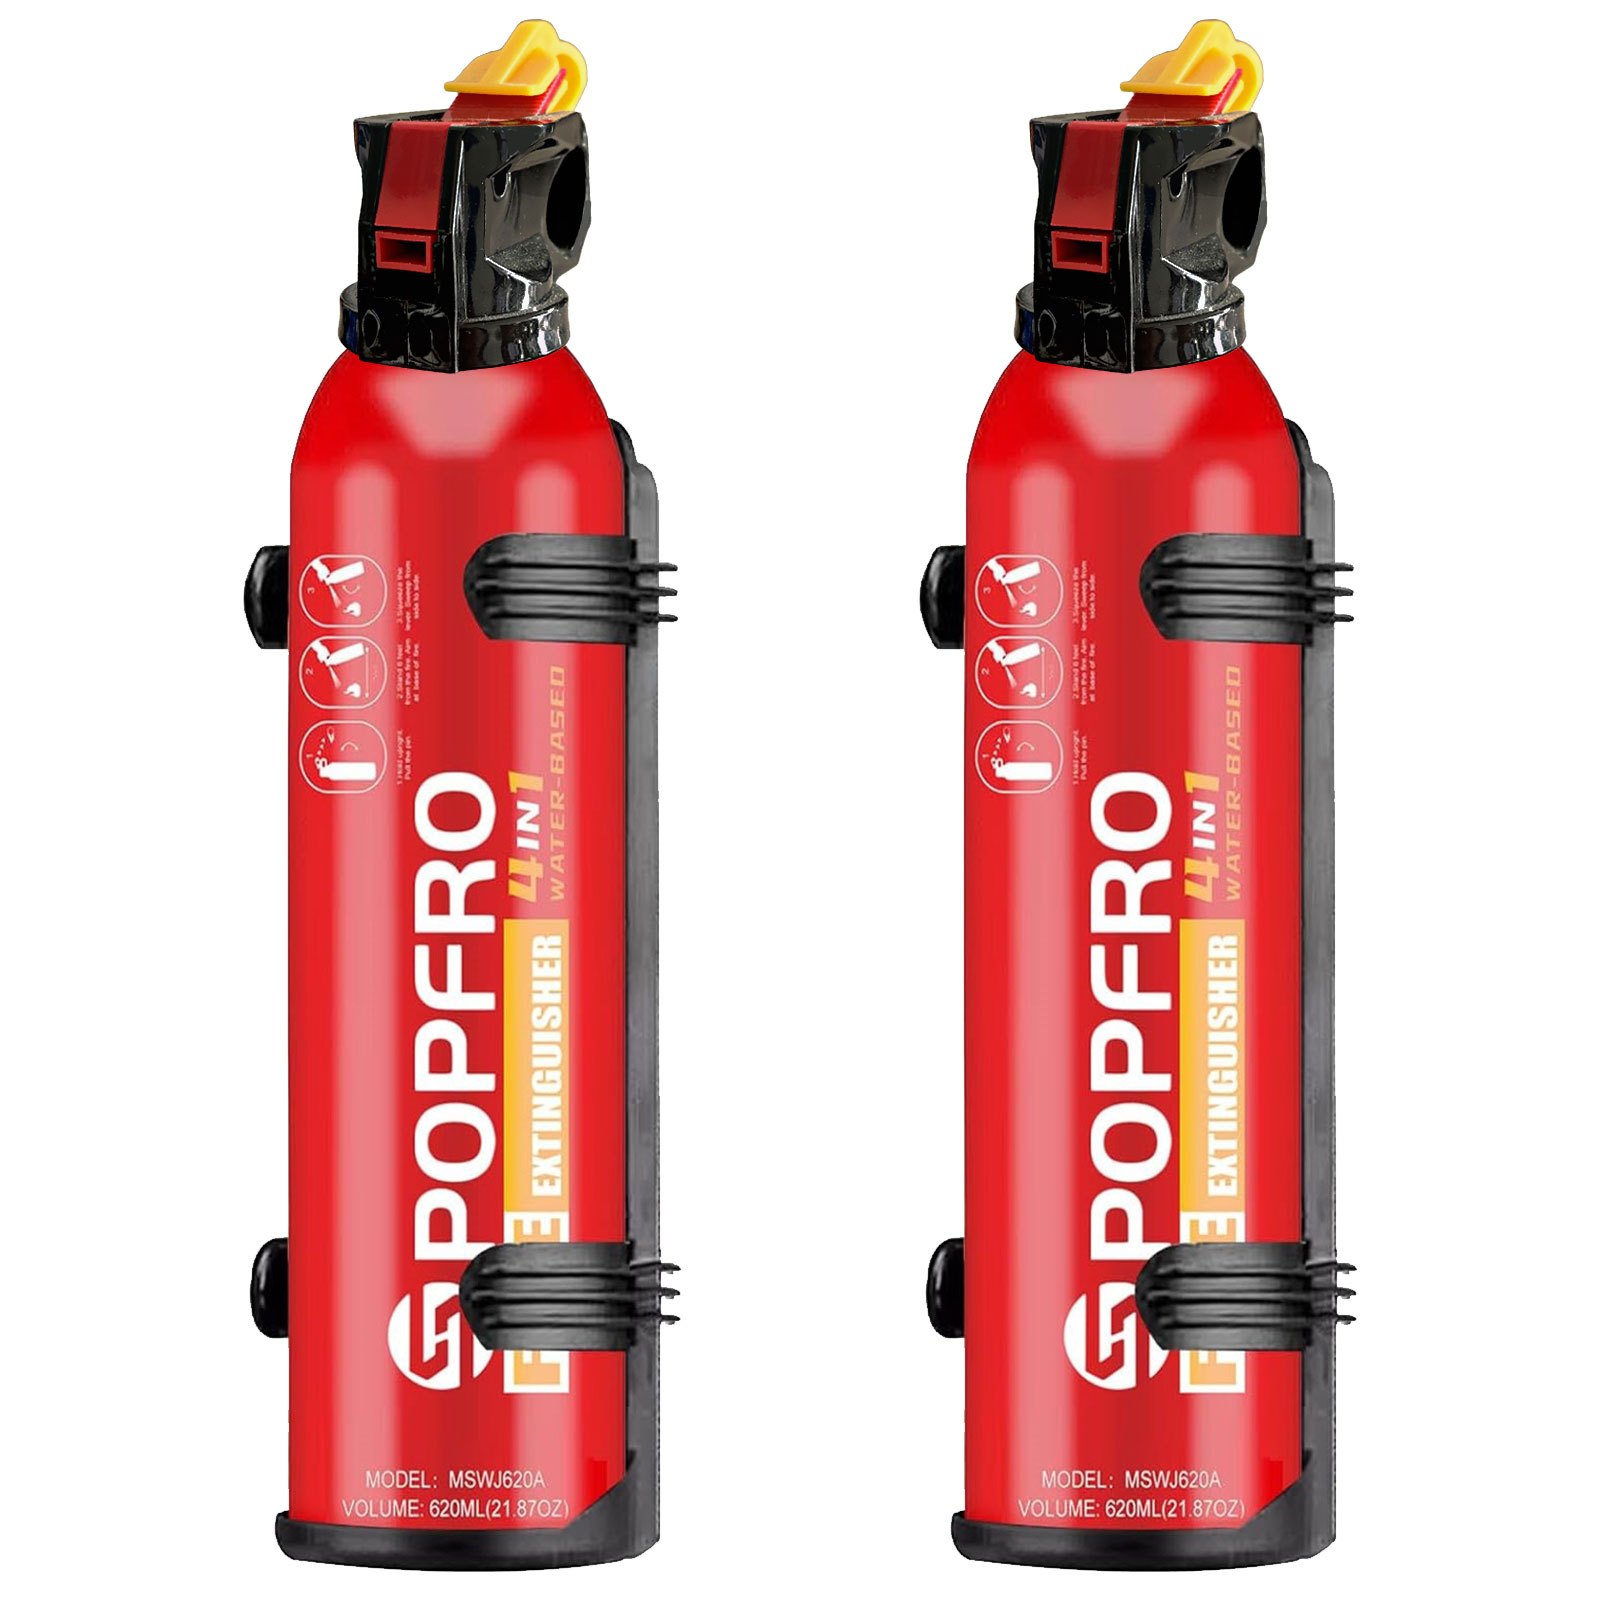 

1pc/2pcs/4pcs Portable Water-based Agent Fire Extinguisher For Home, Garage, Kitchen, Car 0.5a-21b-c-5k,for Electric, Textile And Grease Fires Easy Clean Wall Mount Include